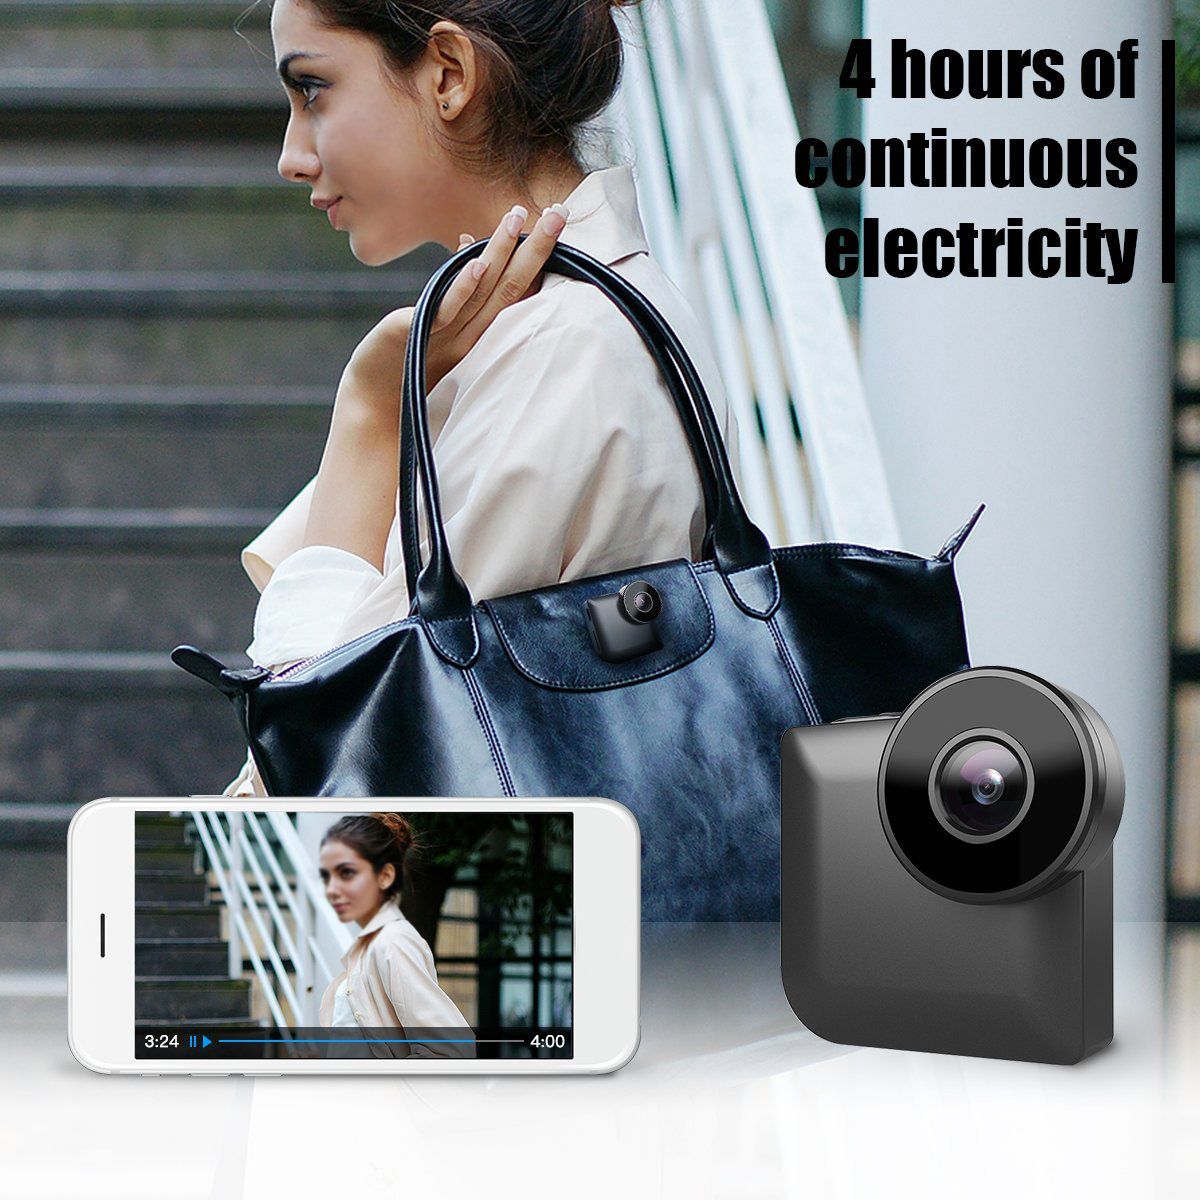 WiFi-140deg-Wide-angle-720P-Camera-Motion-Detection-Remote-Intelligent-Infrared-IP-Wireless-HD-Camer-1330041